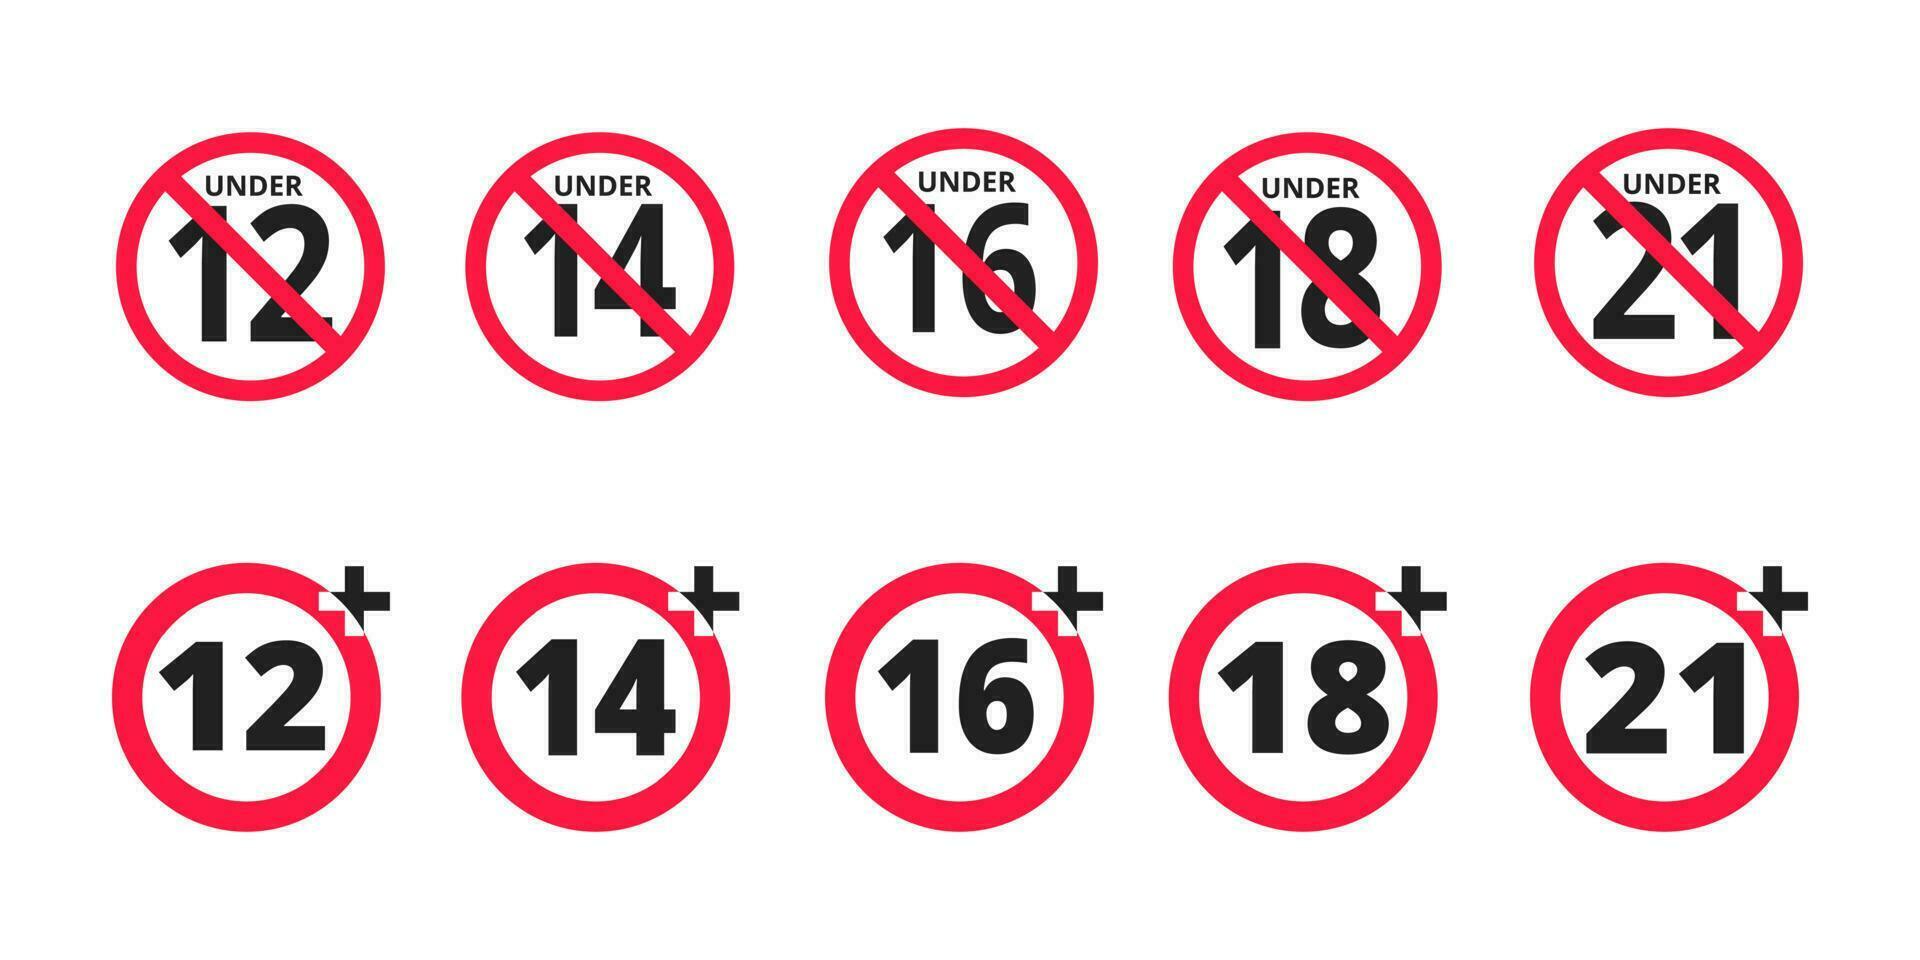 Adults content only age restriction 12, 14, 16, 18, 21 plus years old icon signs set. vector